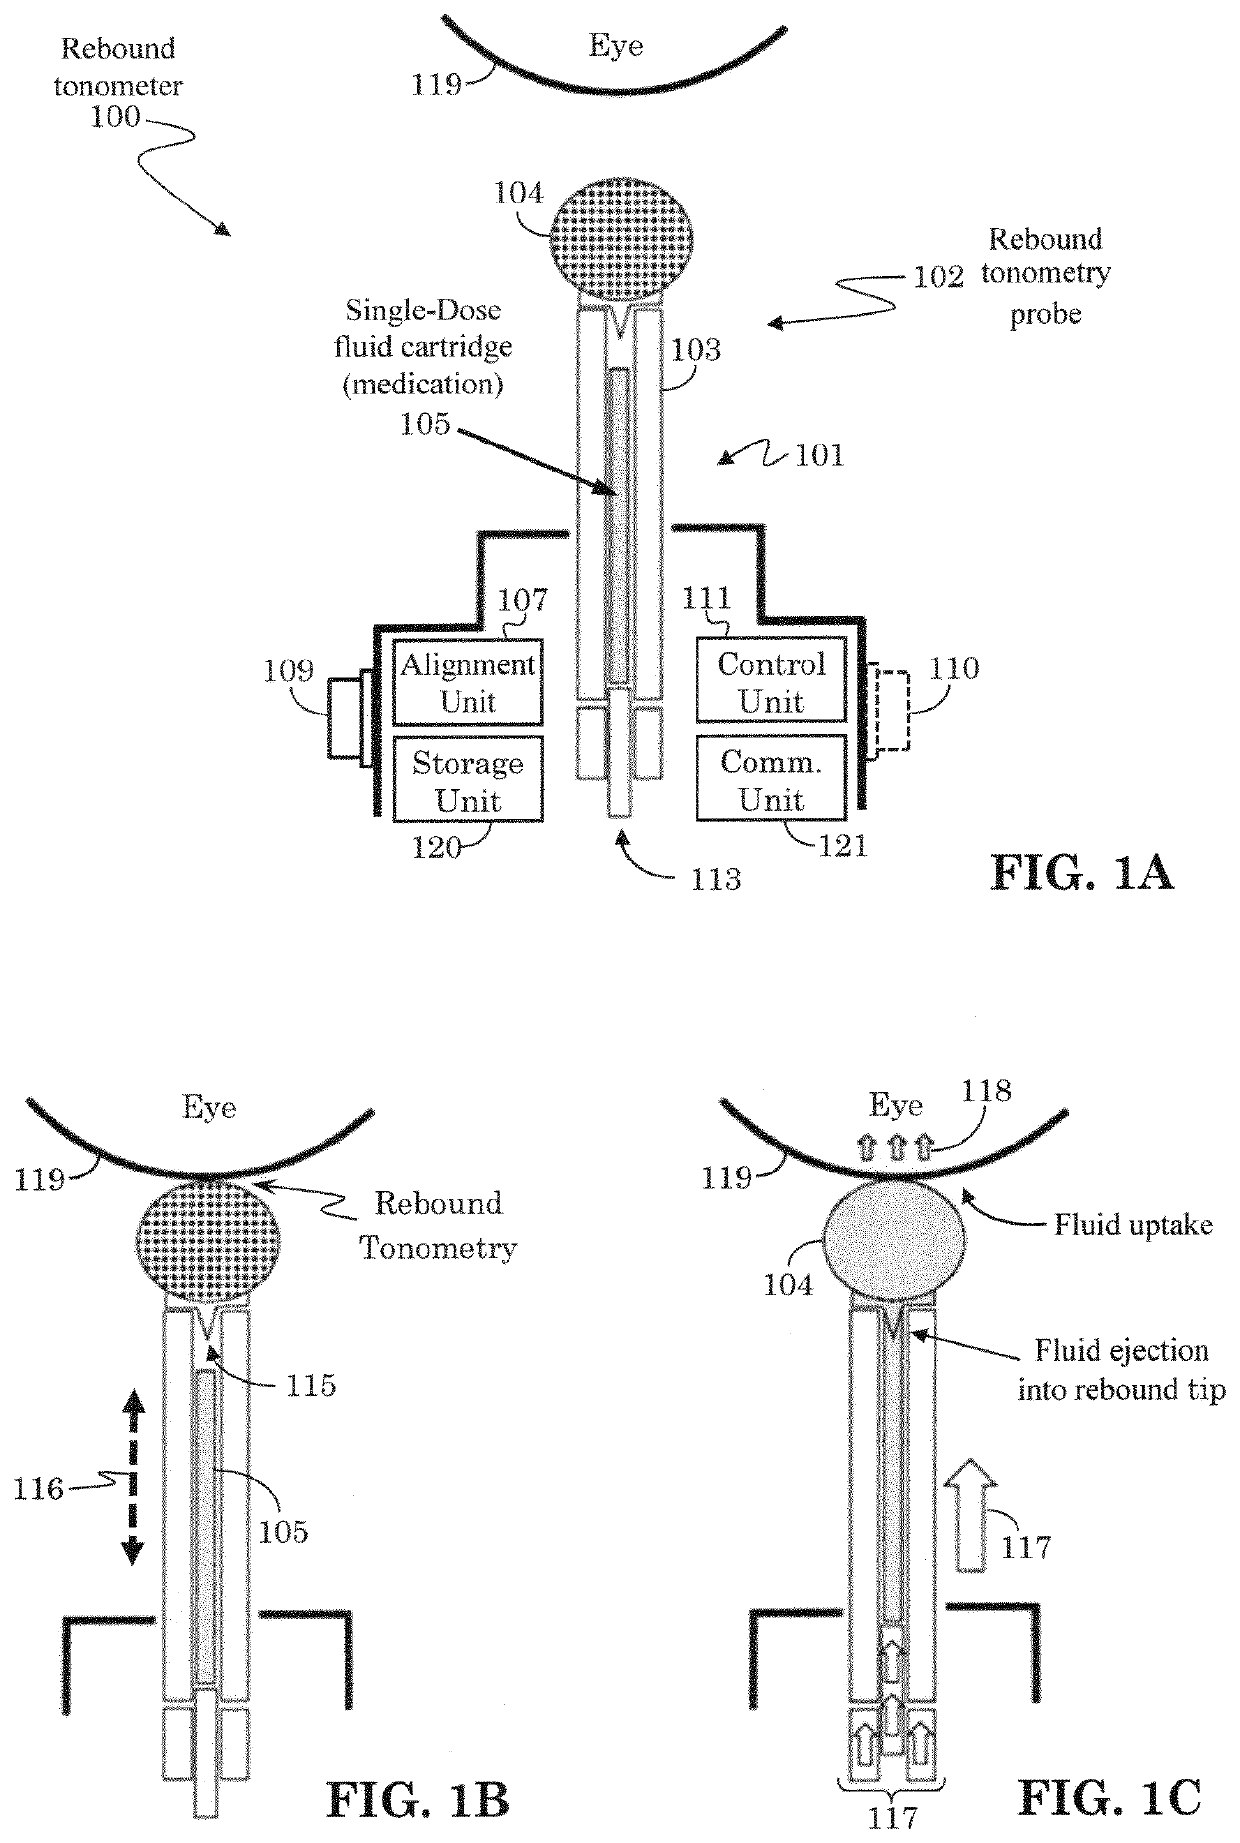 Combination device for tonometrical measuring and drug application on an eye